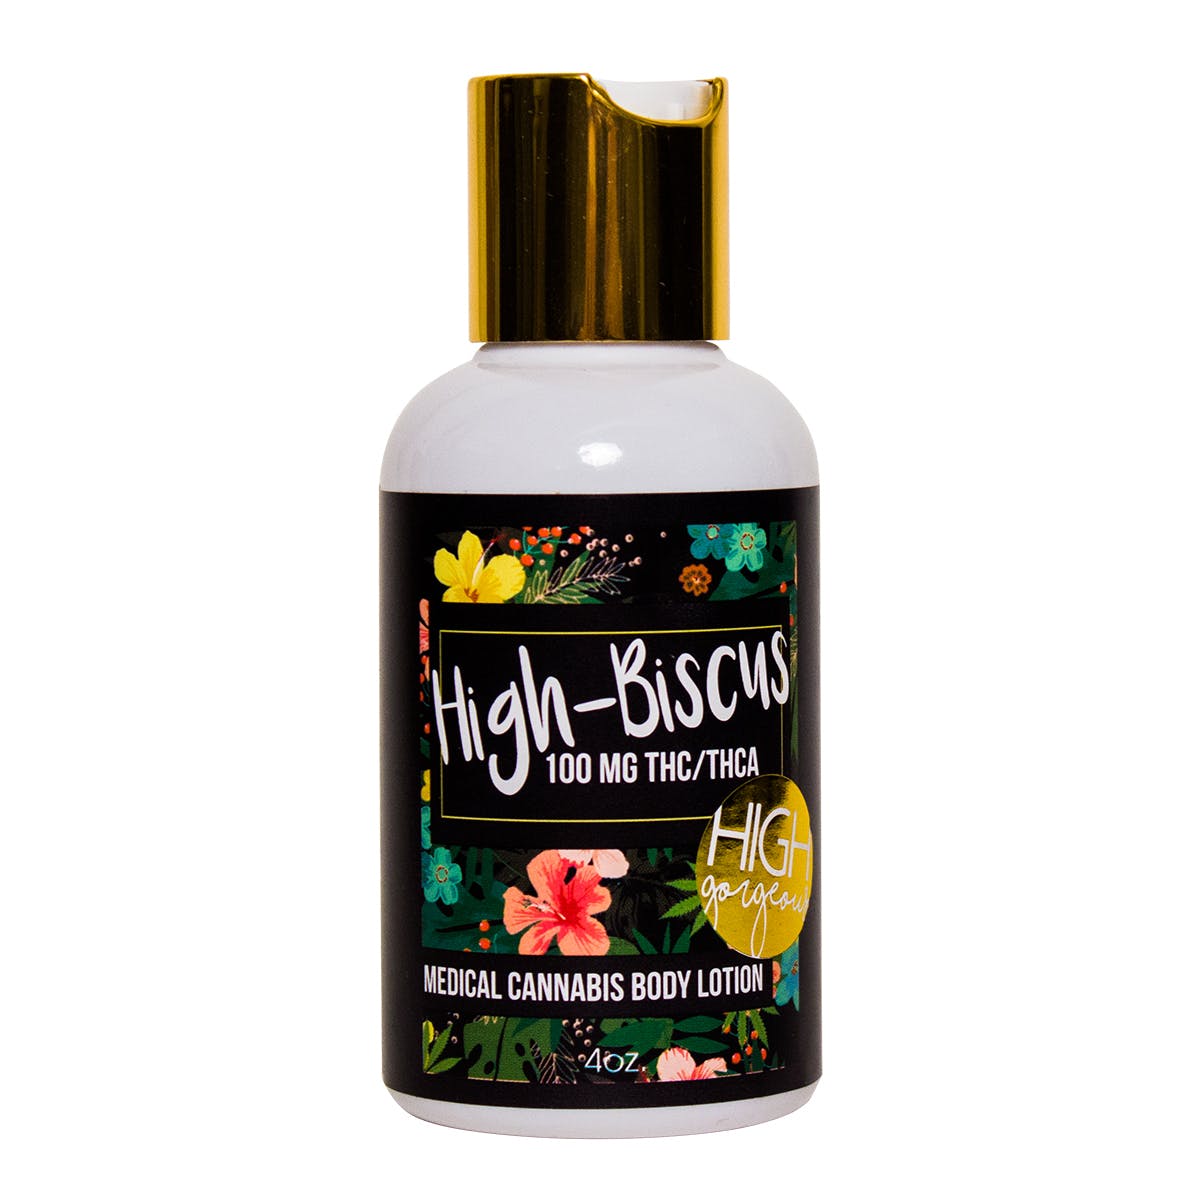 High-Biscus Body Lotion 100mg THC/THCA